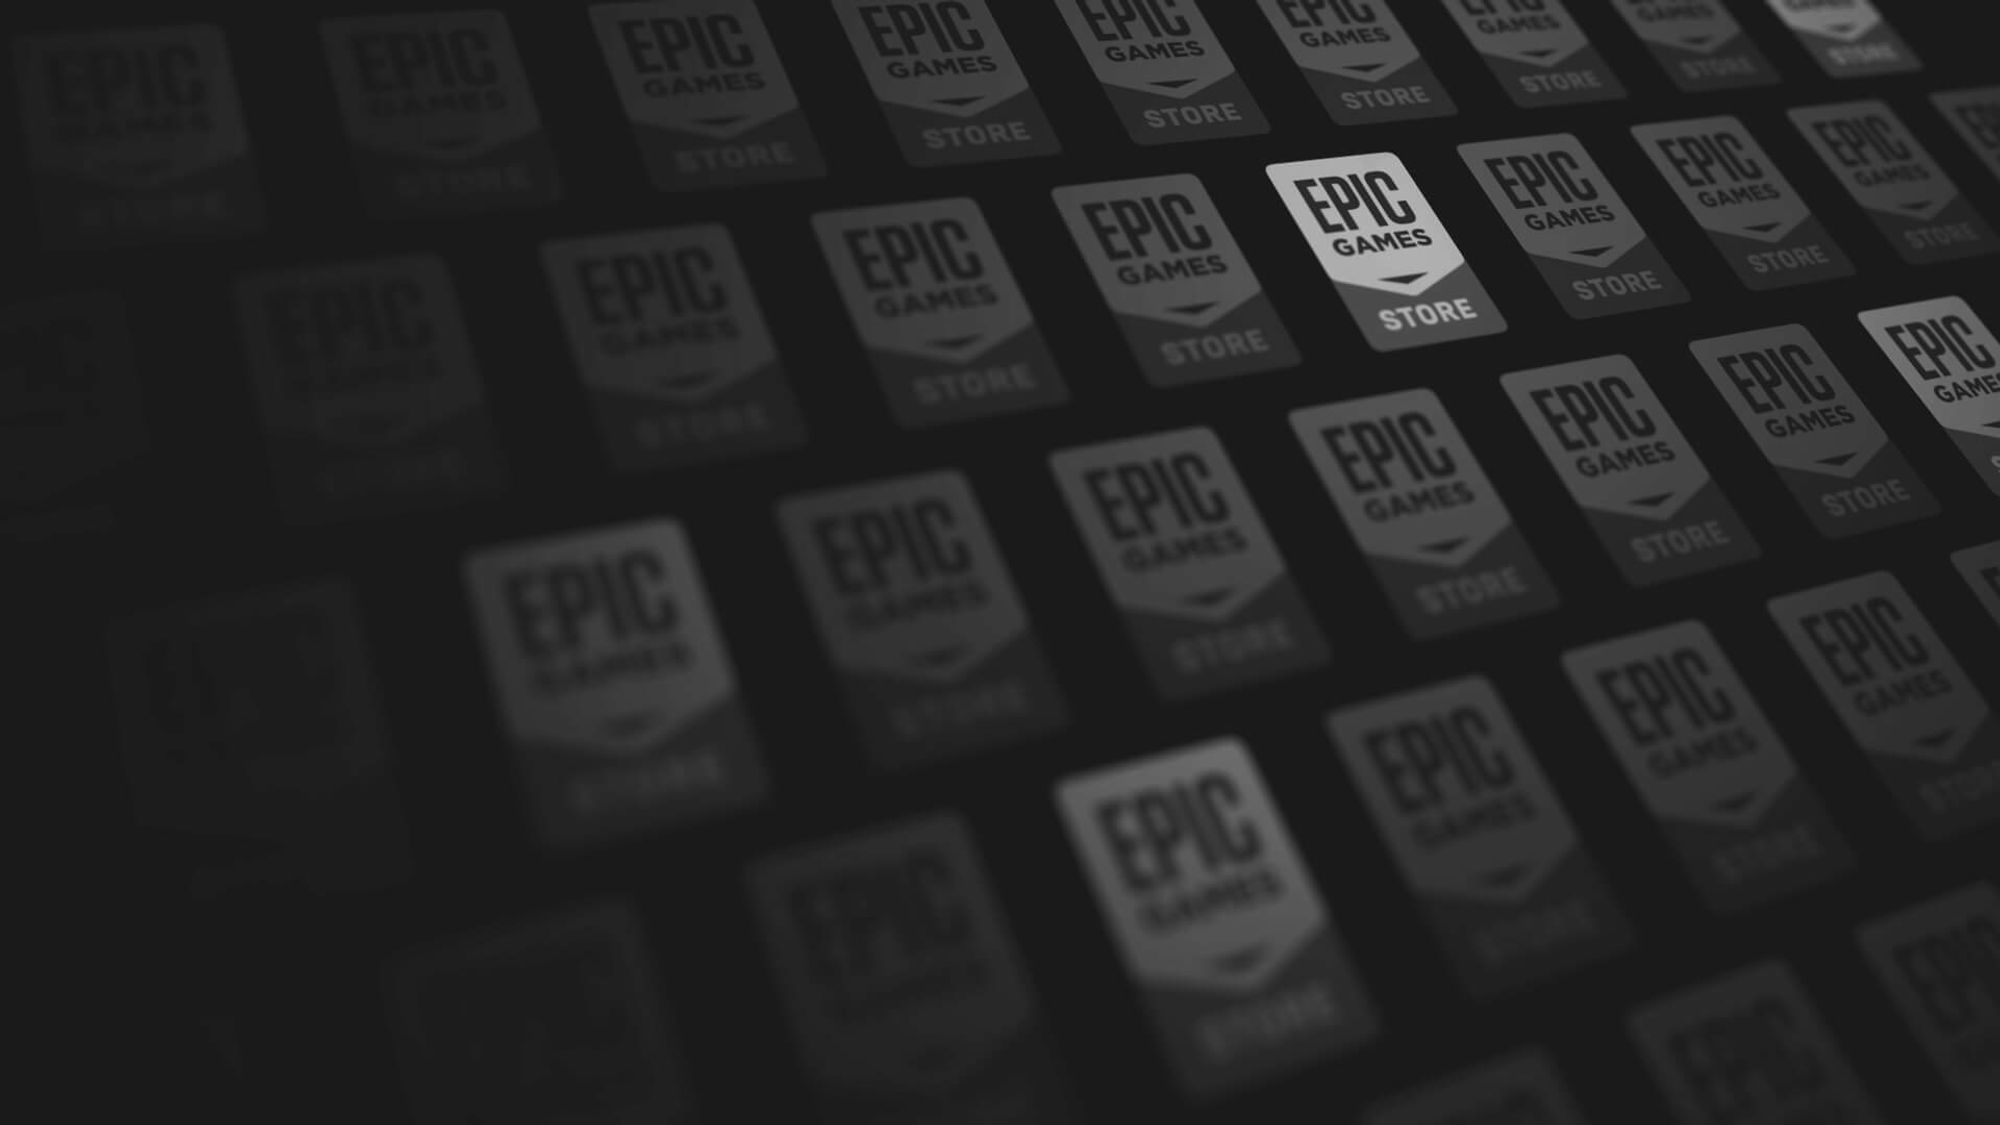 Epic is pouring $2 billion of funding into its Metaverse - MSPoweruser